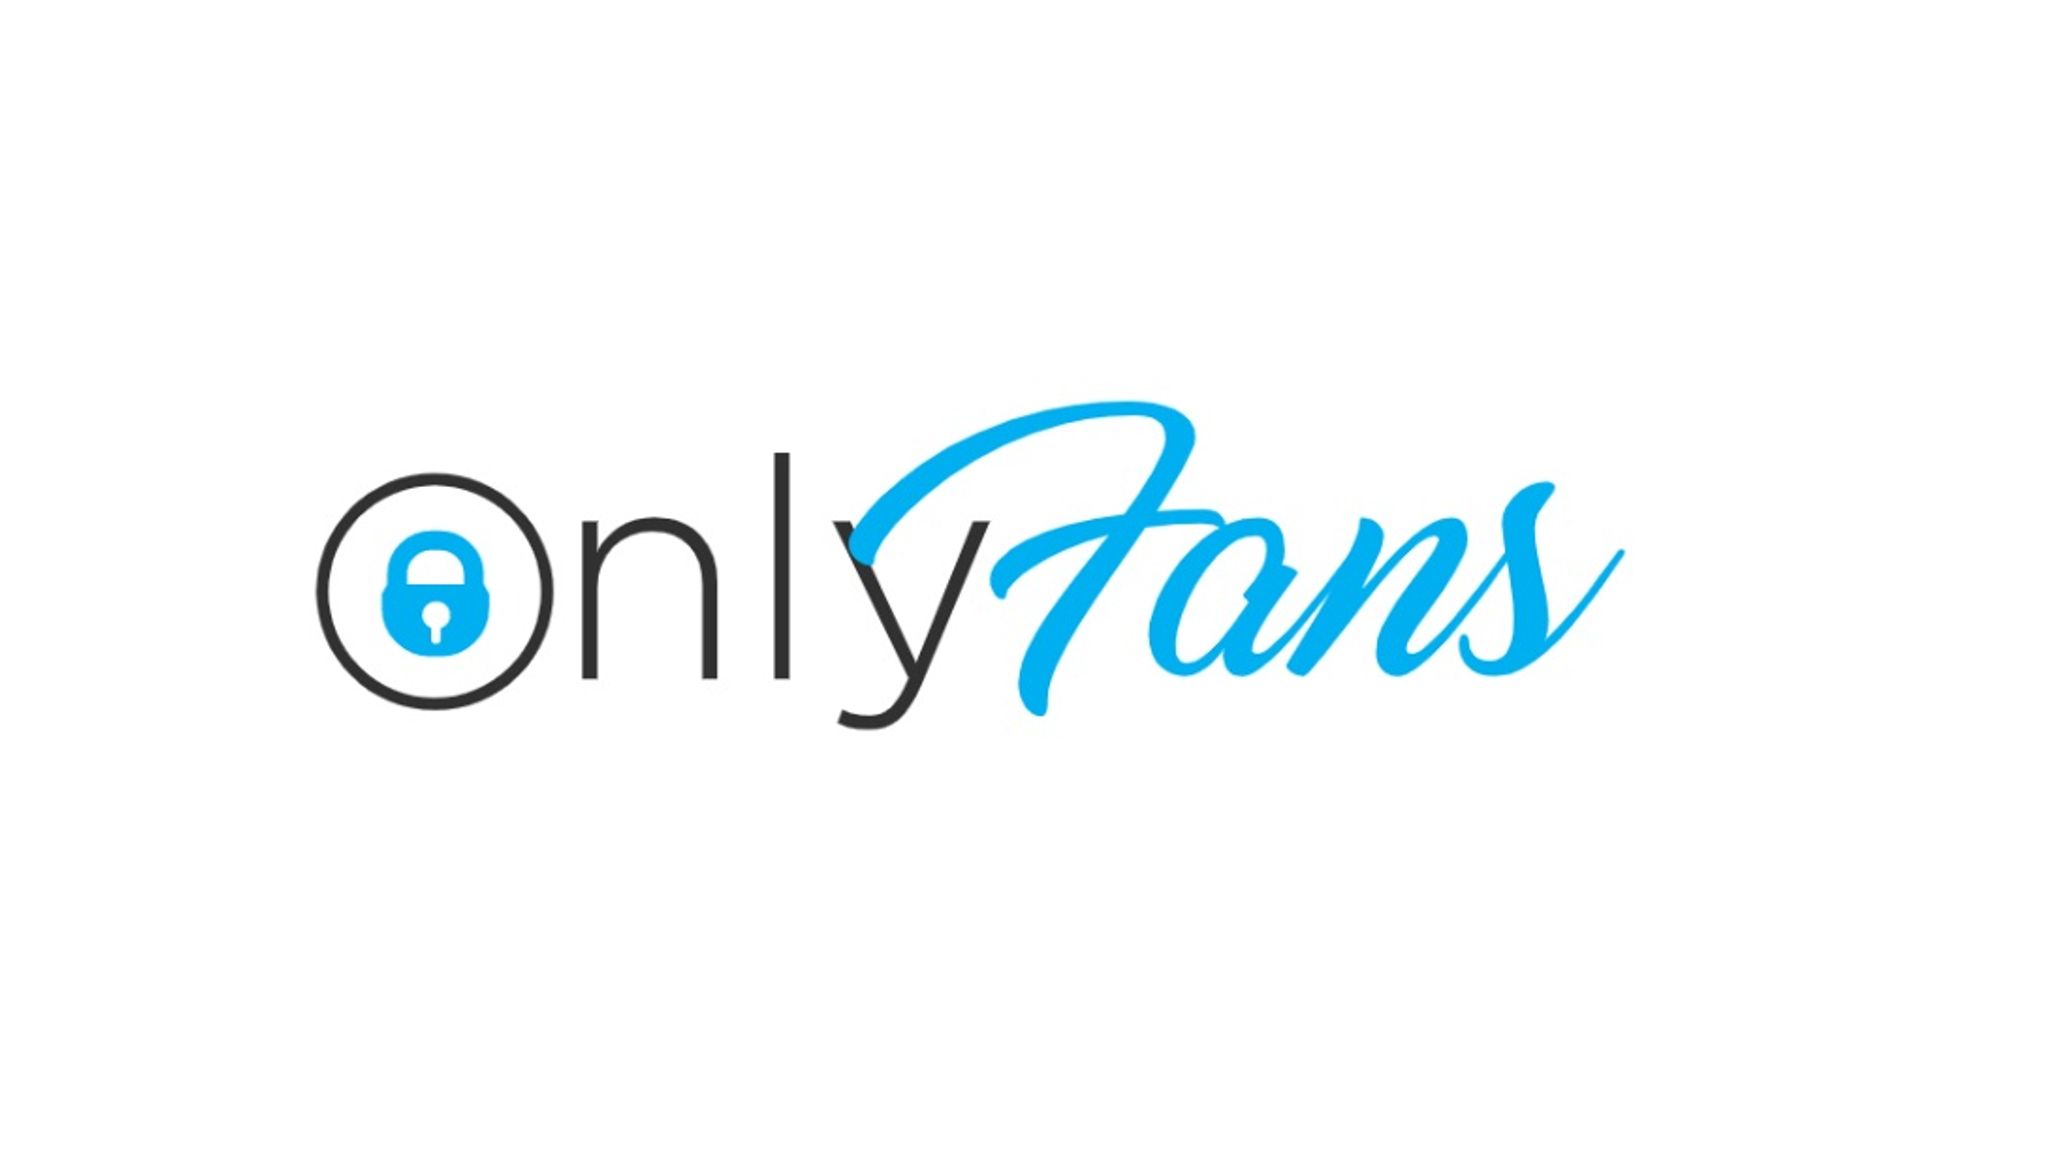 You to file taxes for onlyfans do have ONLYFANS FAQs